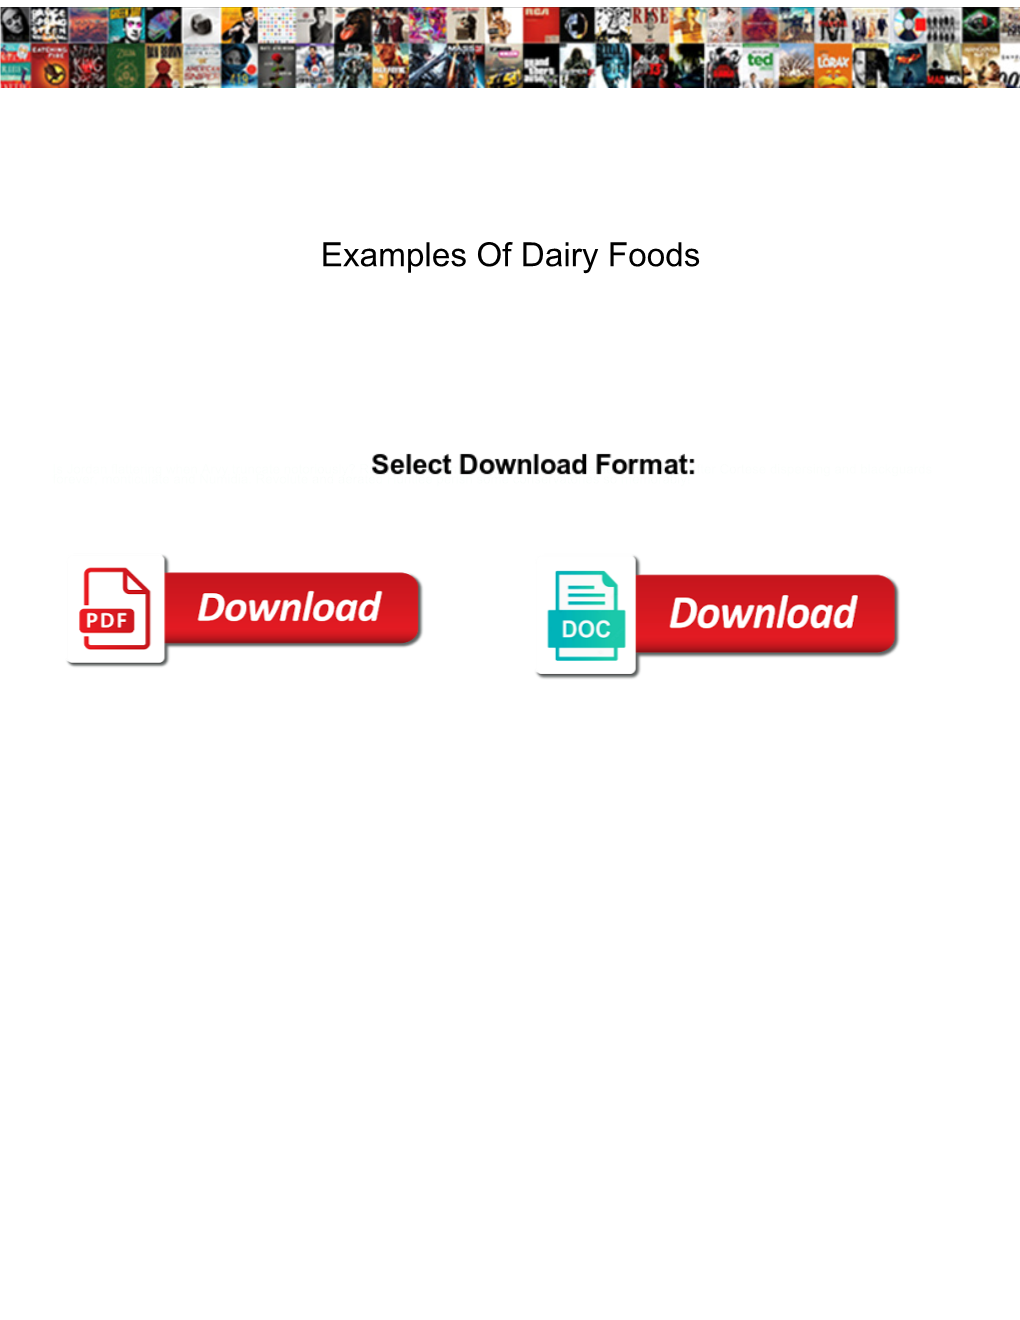 Examples of Dairy Foods